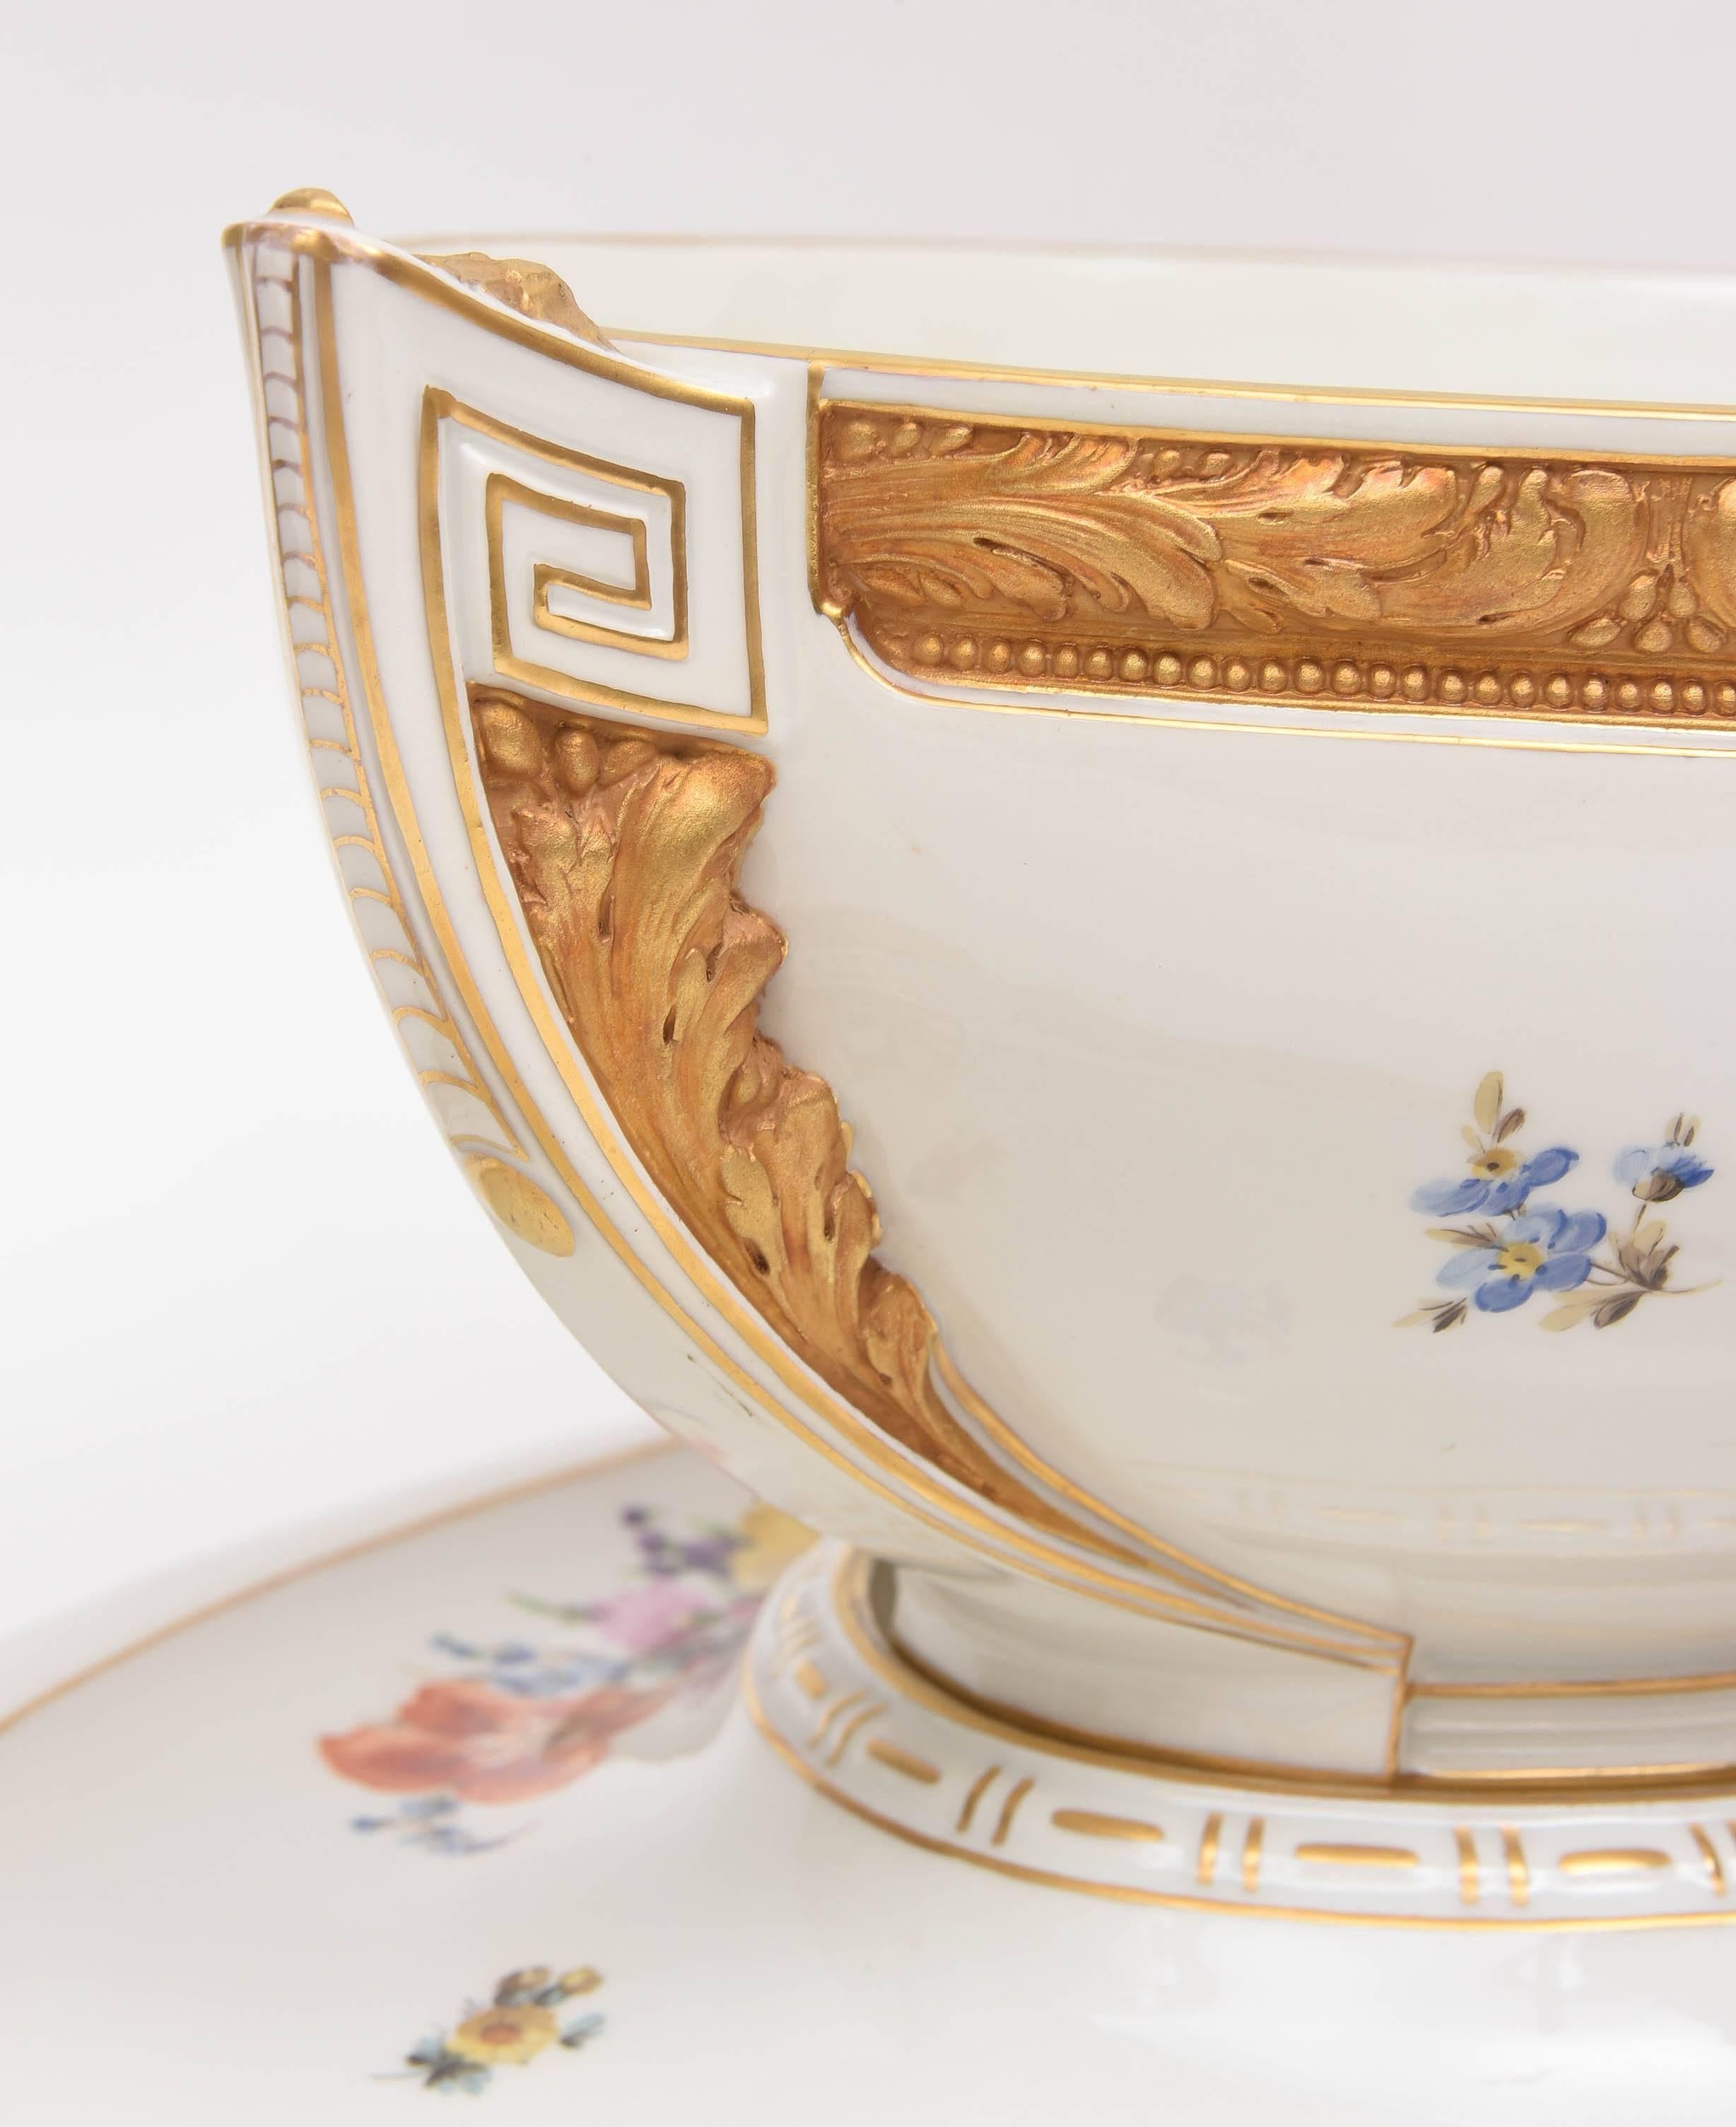 Gold Impressive 19th century KPM Tureen and Stand, Hand Painted, Gilt Encrusted